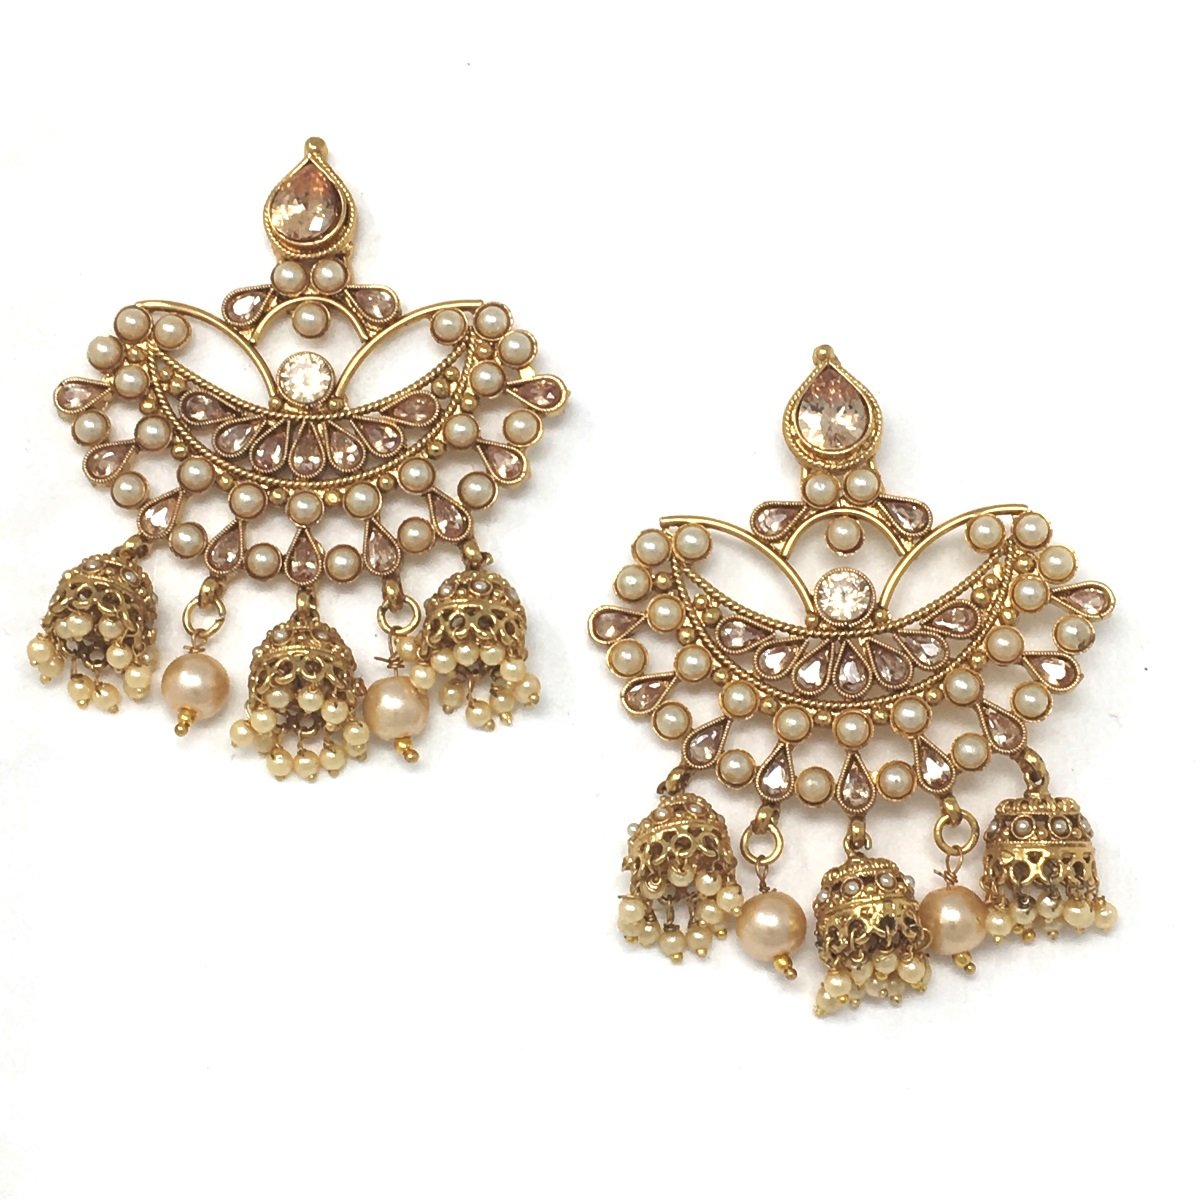 Gold Earrings with Three Small Jhumkas Drops